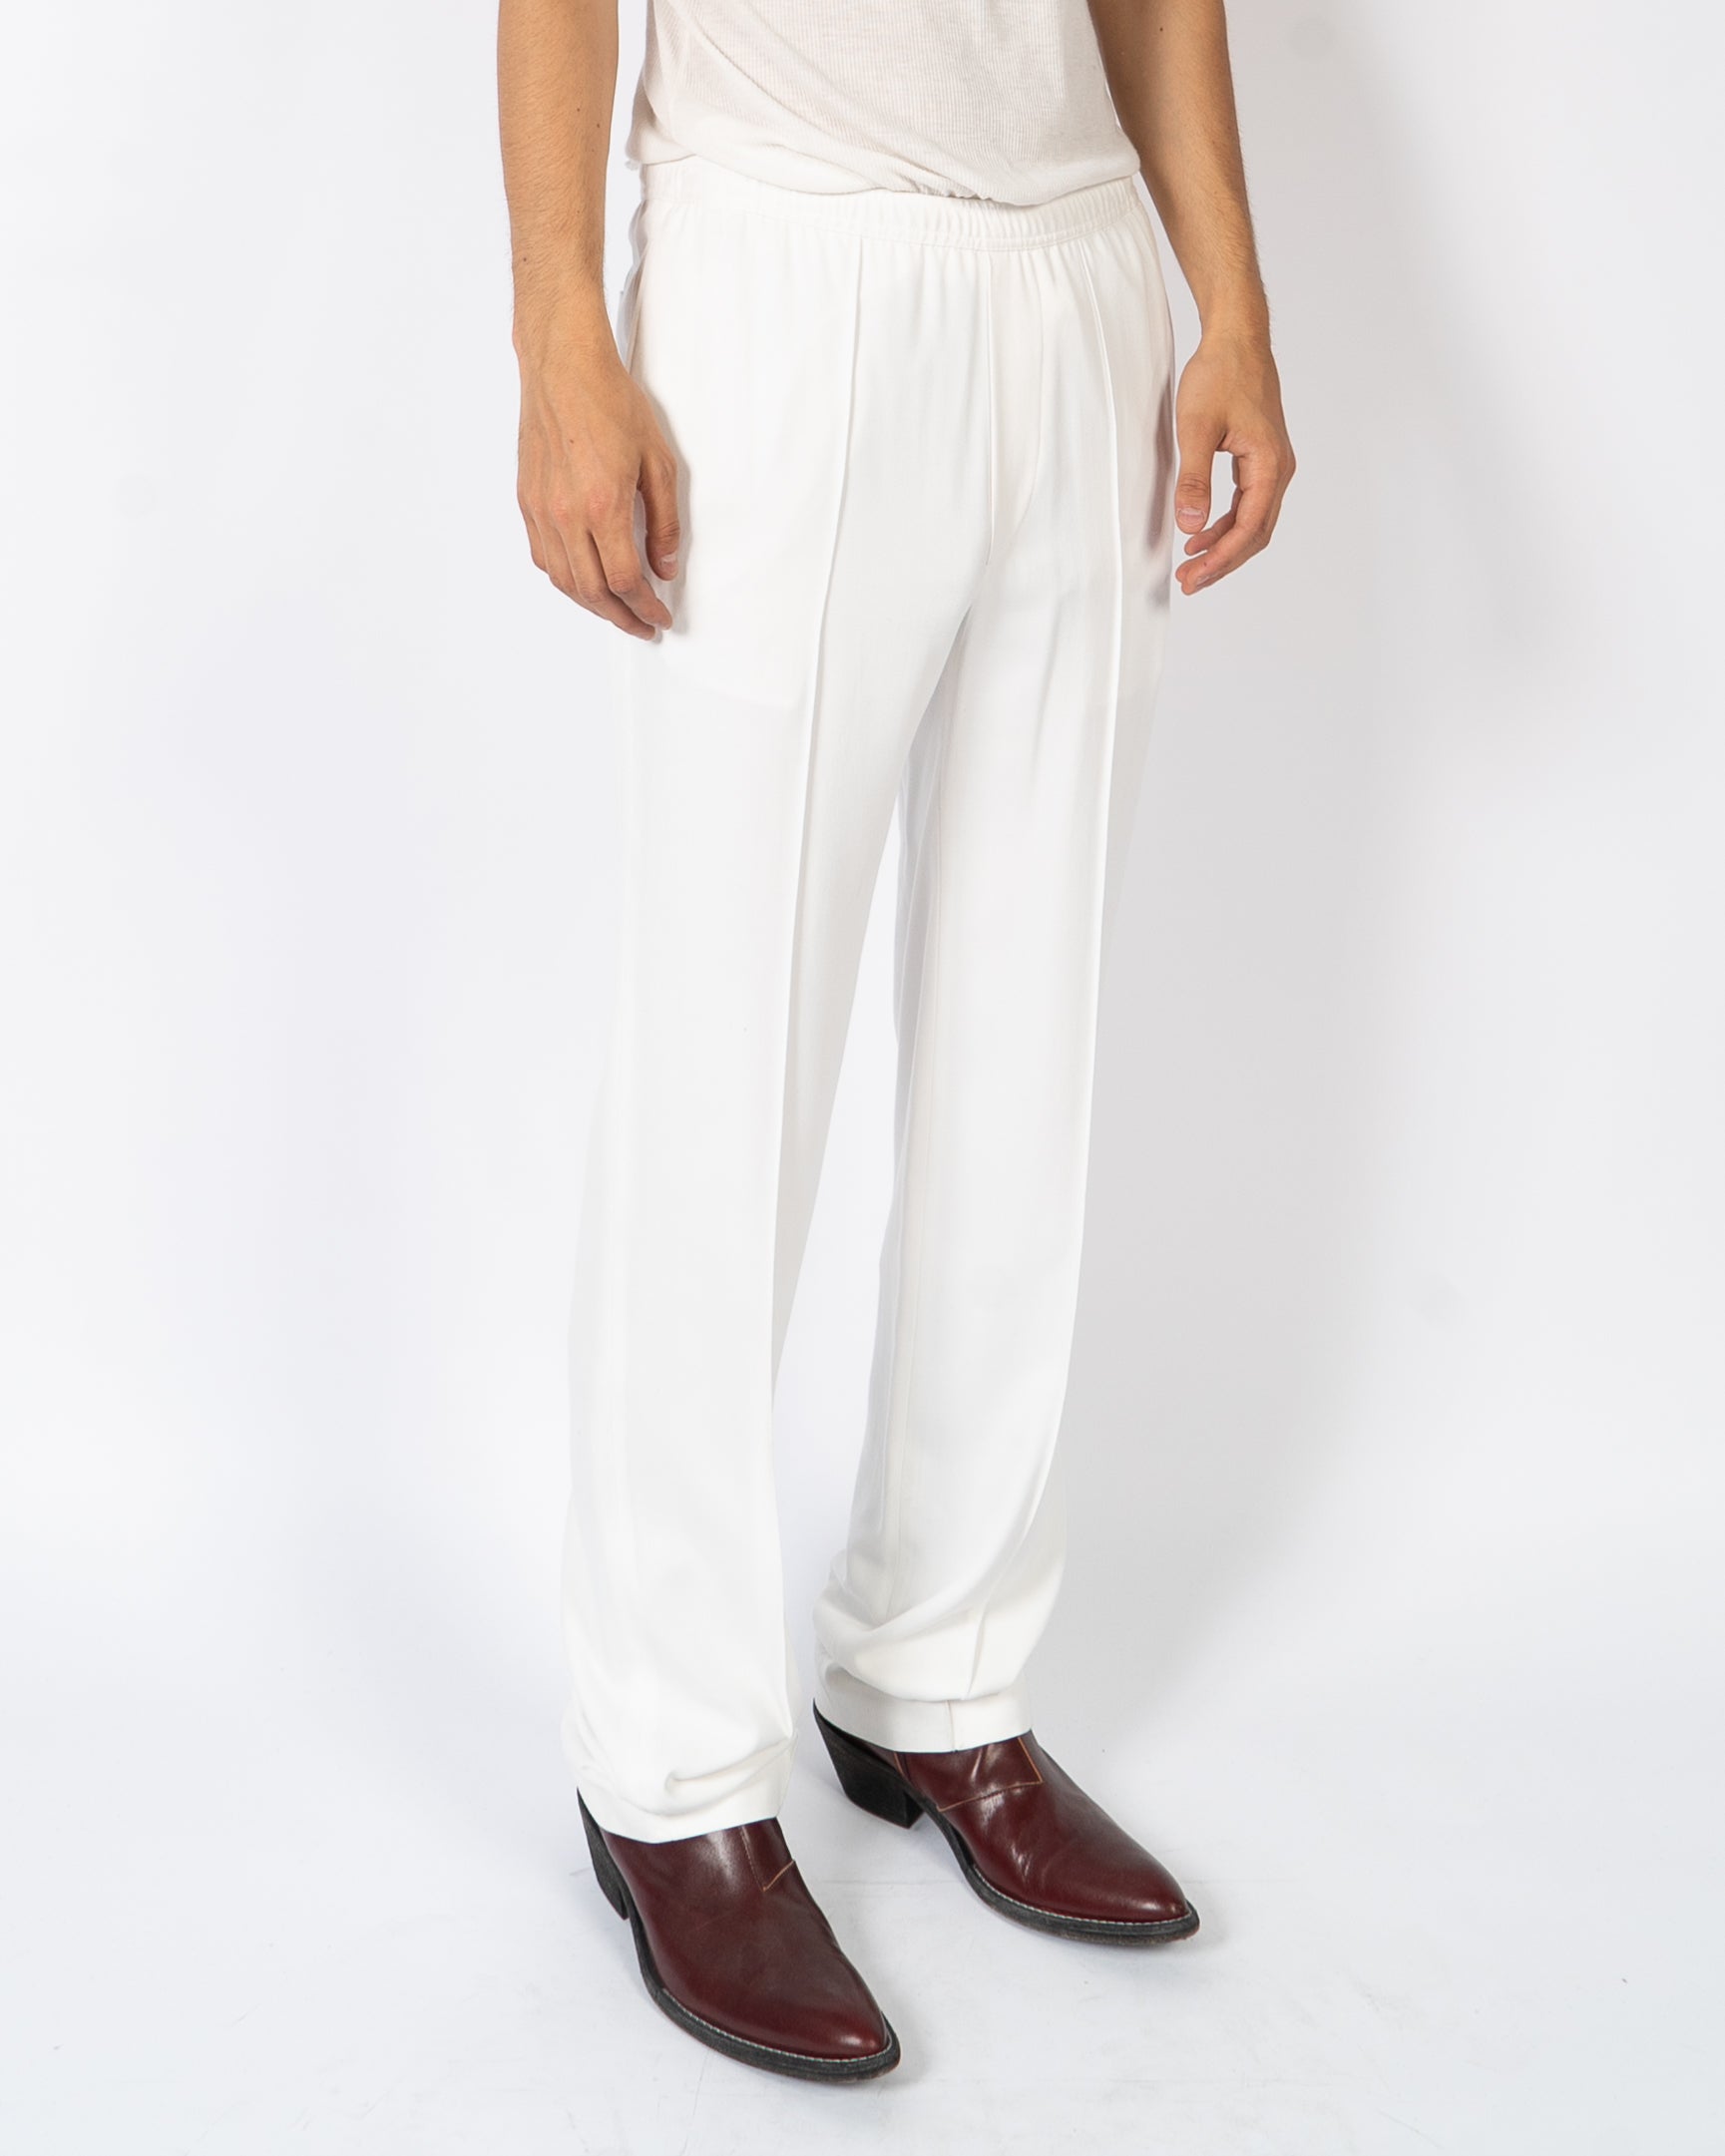 SS20 Trooper White Workwear Trousers Sample